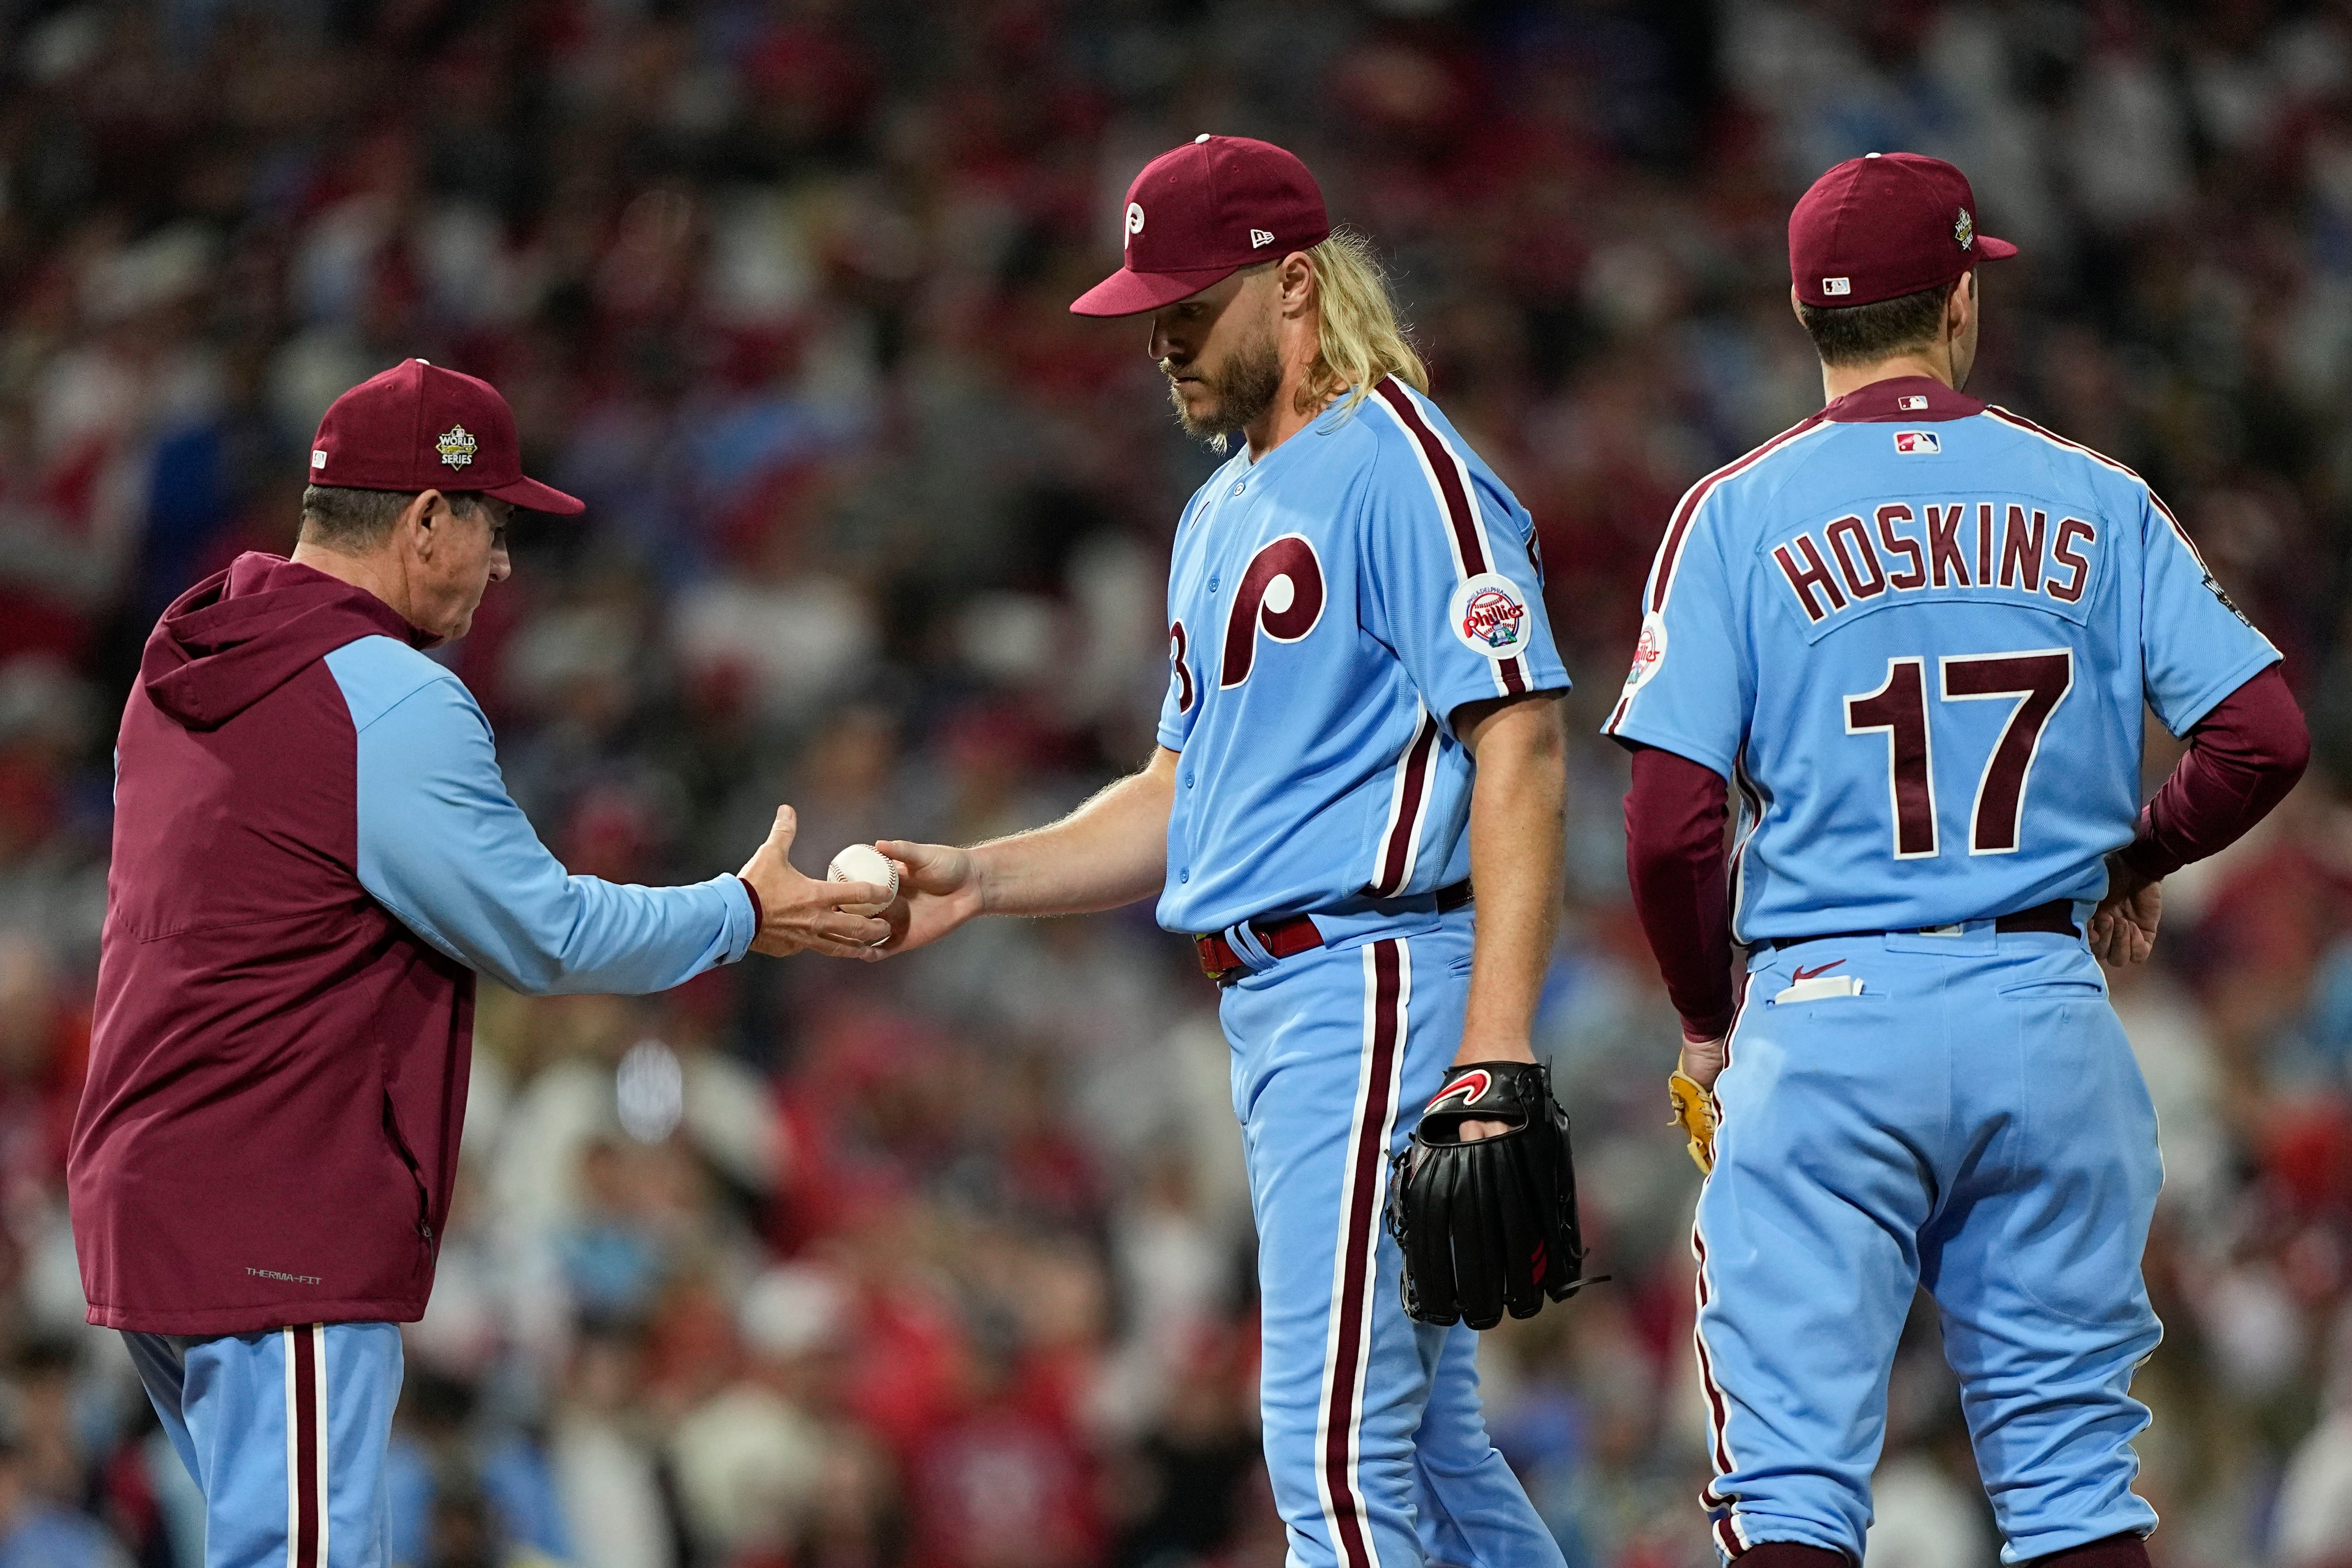 Phillies' bats go cold in crunch time in Game 5 loss – KGET 17